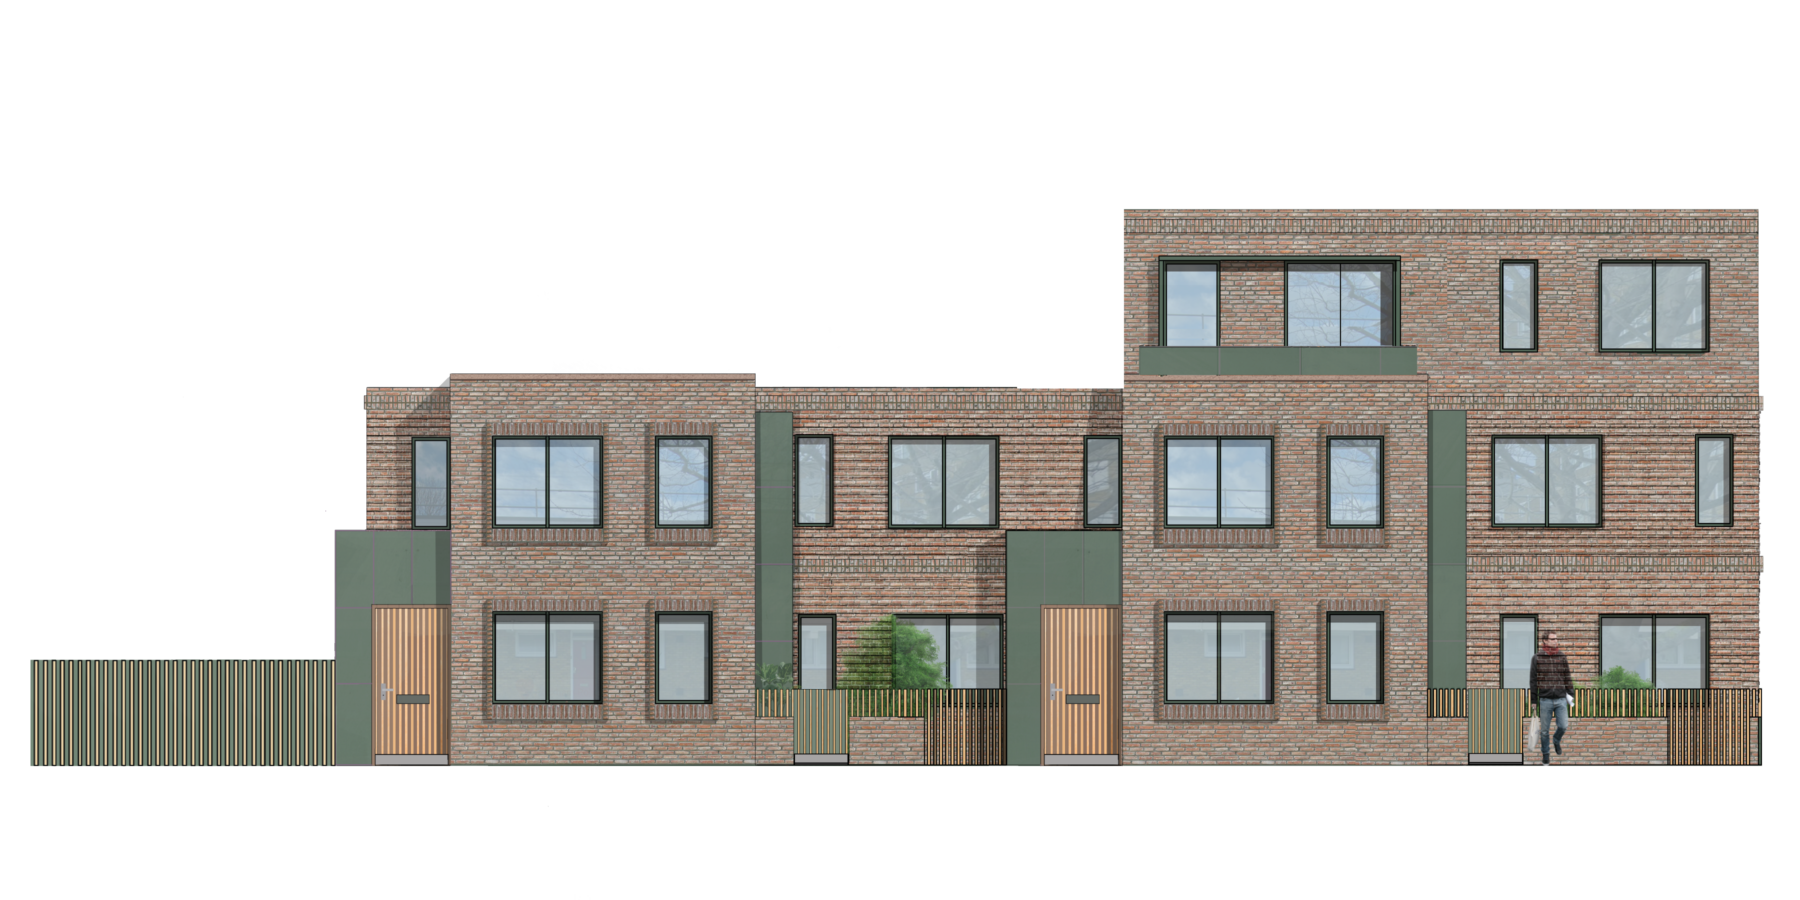 Sarah-Wigglesworth-Architects Queens-Road Front-Elevation 1800x3600